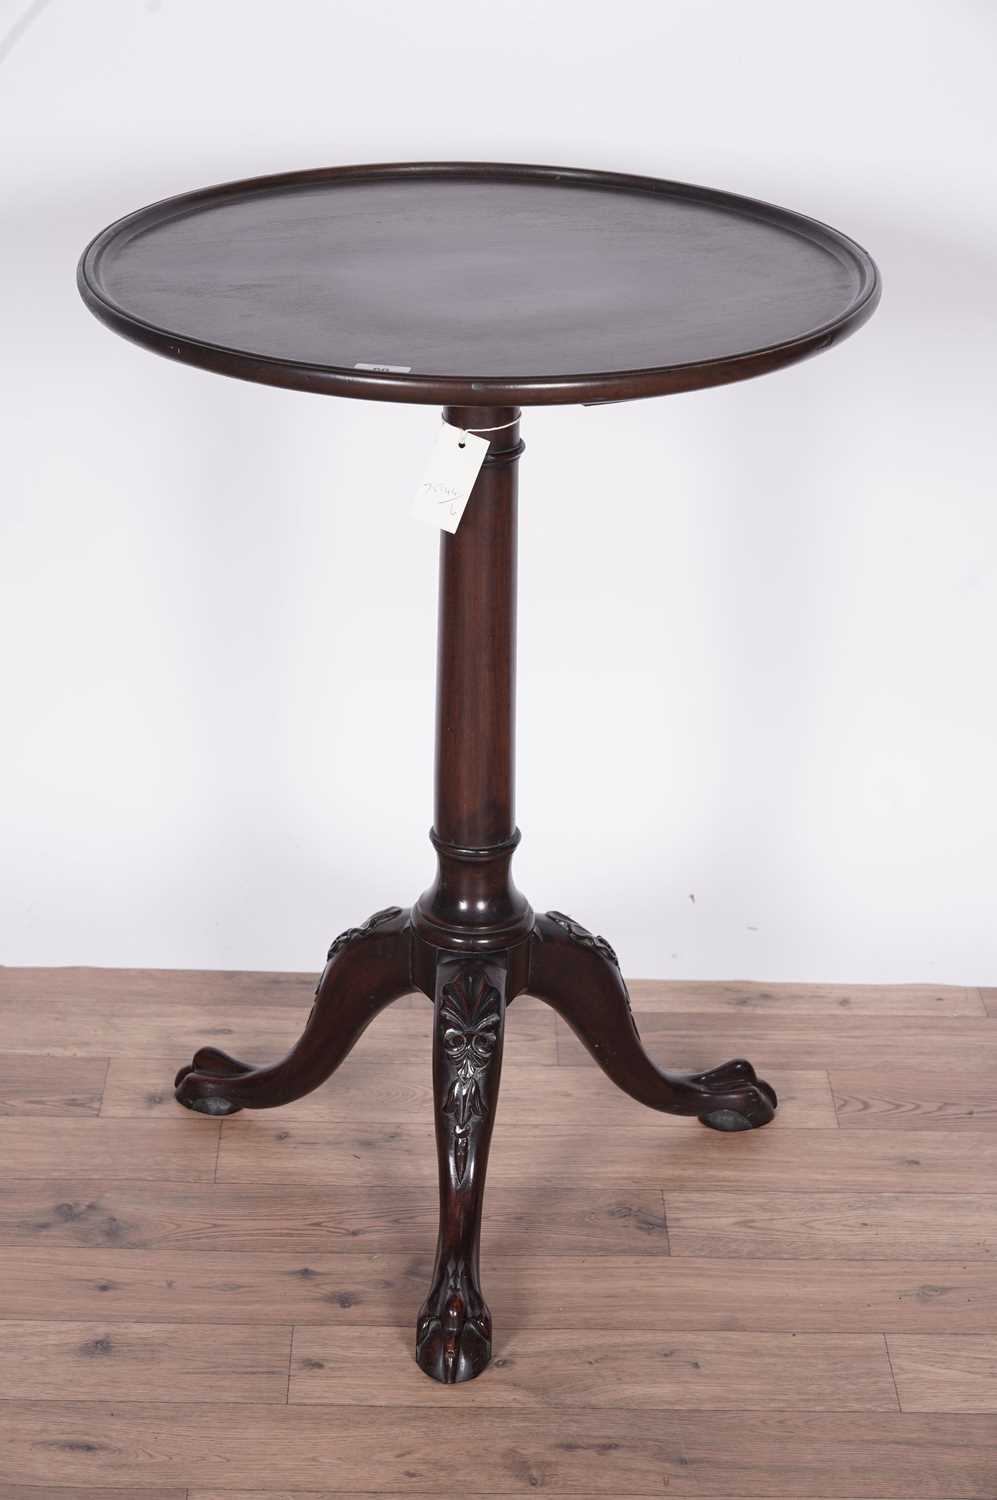 A decorative and well carved mahogany tripod table, c1900